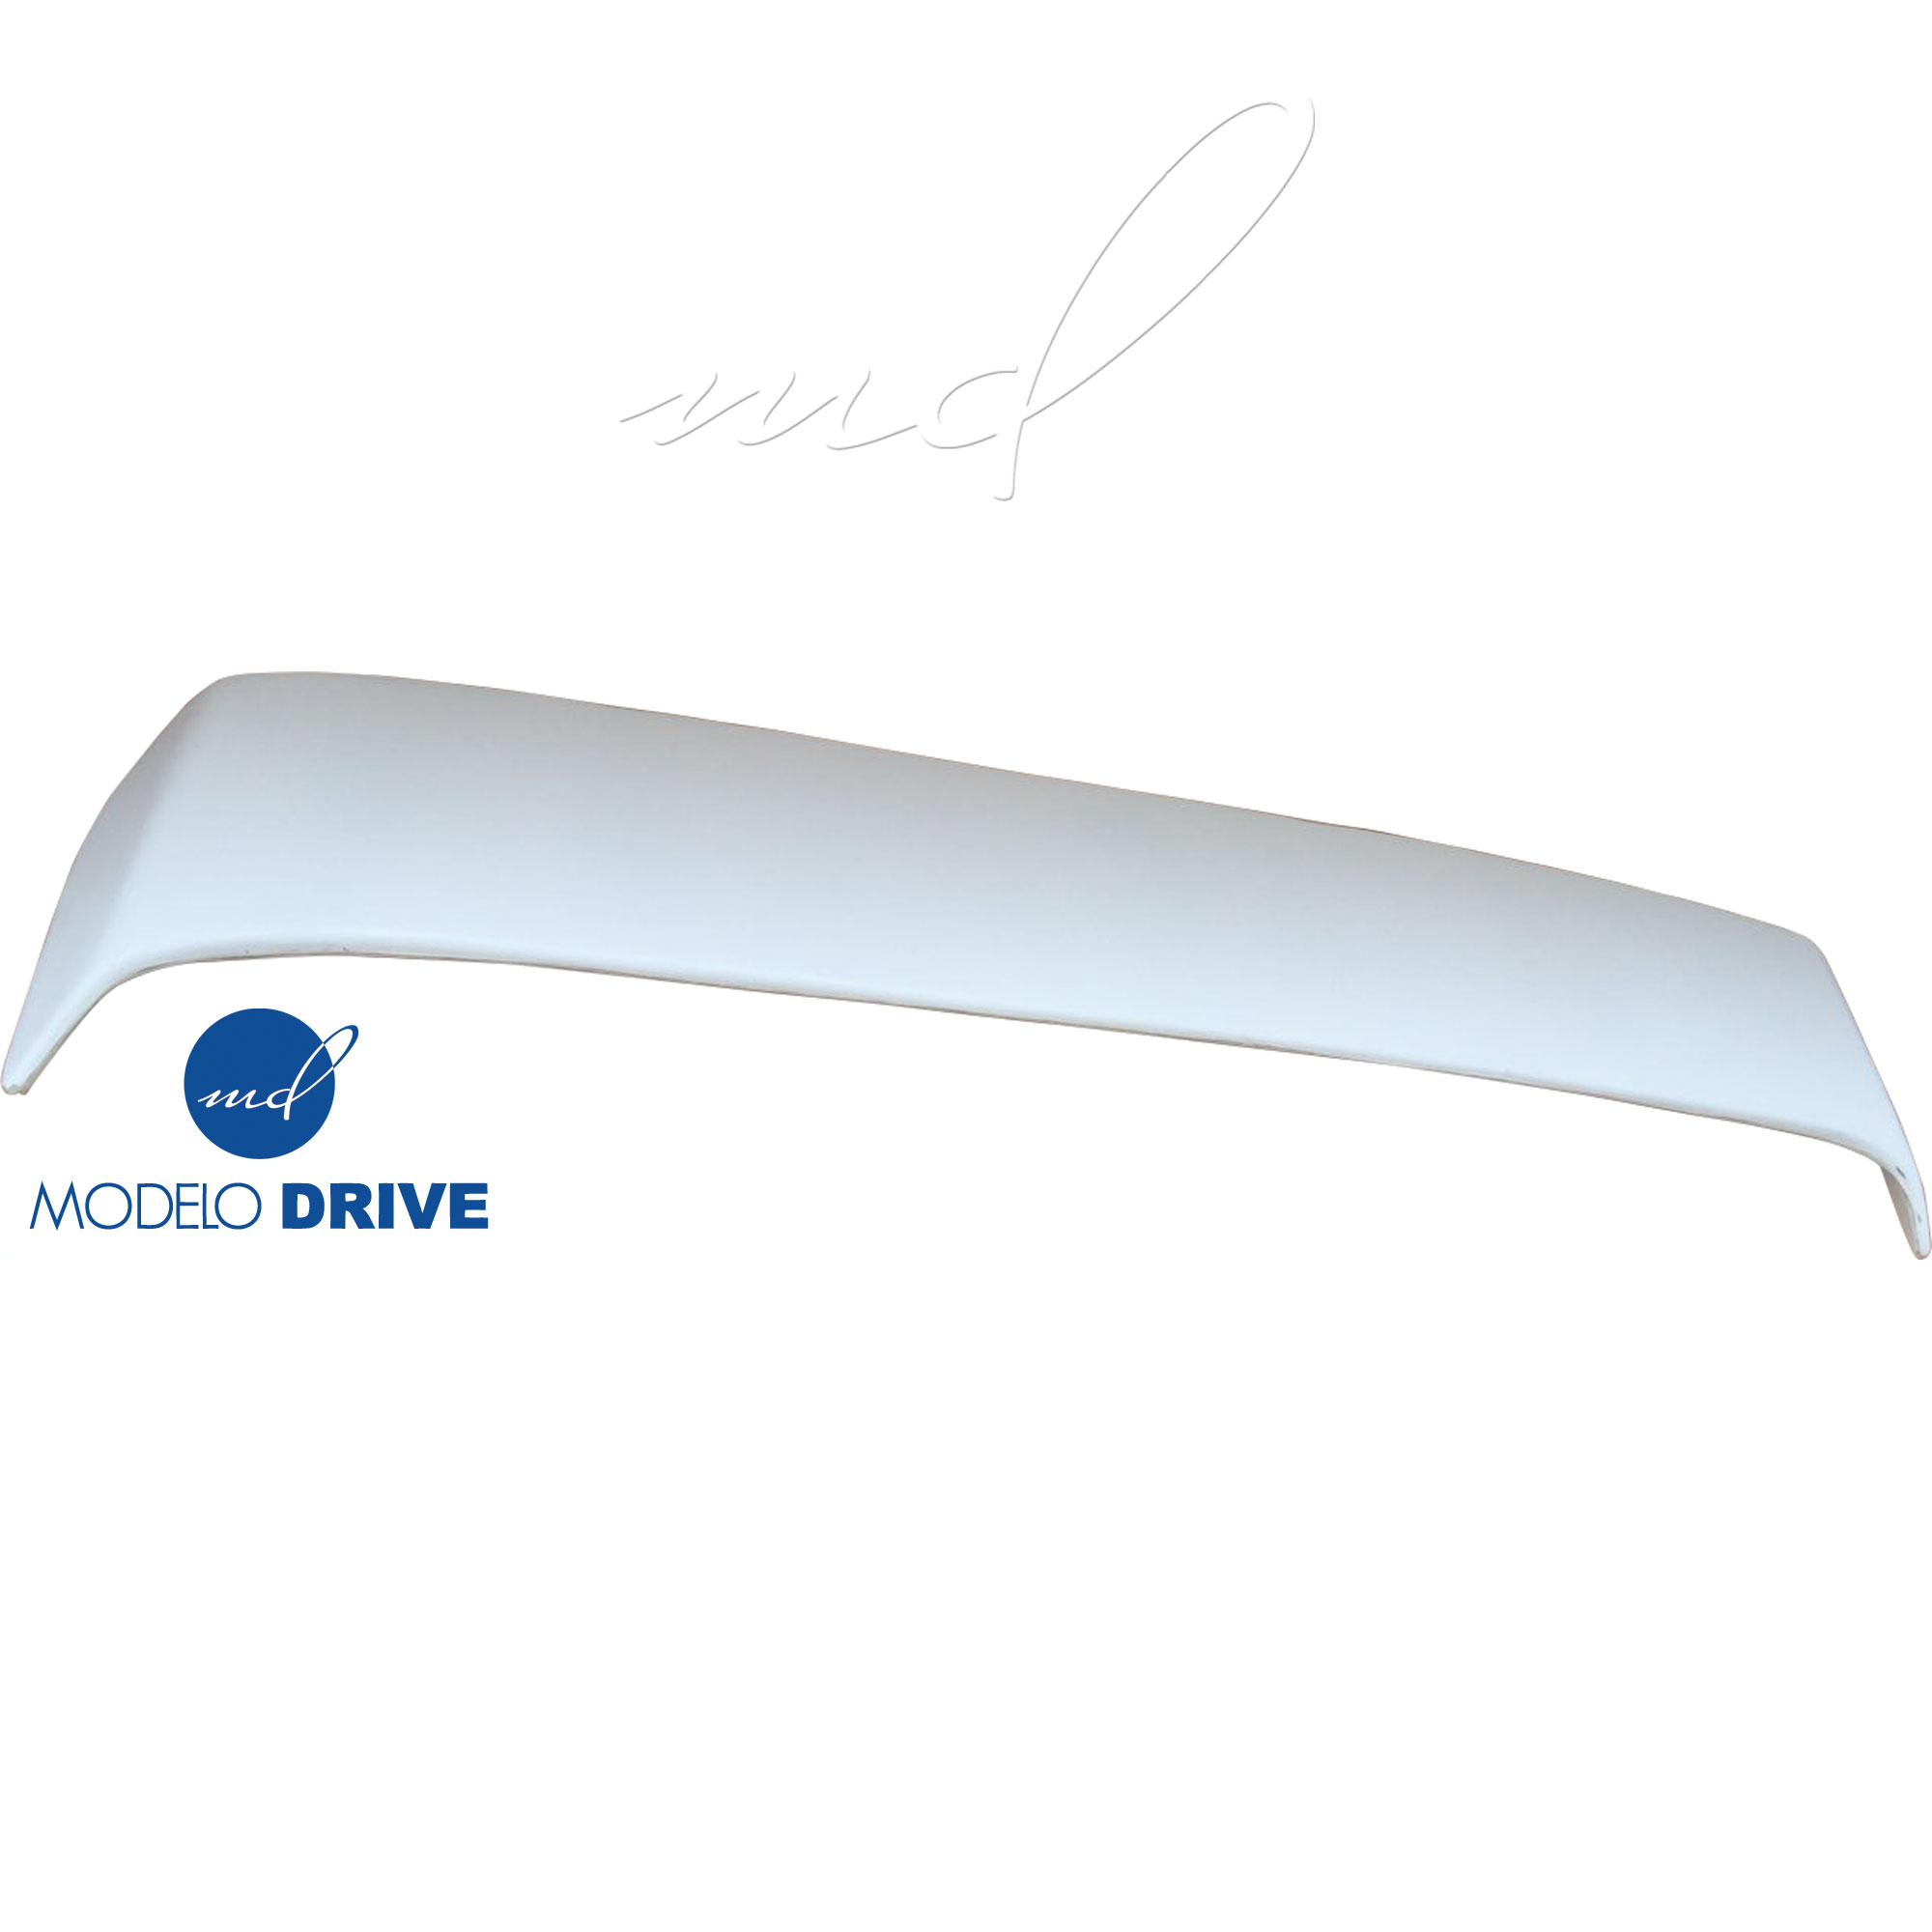 ModeloDrive FRP DMA Trunk Spoiler Wing > Nissan Skyline R32 1990-1994 > 2dr Coupe - Image 4